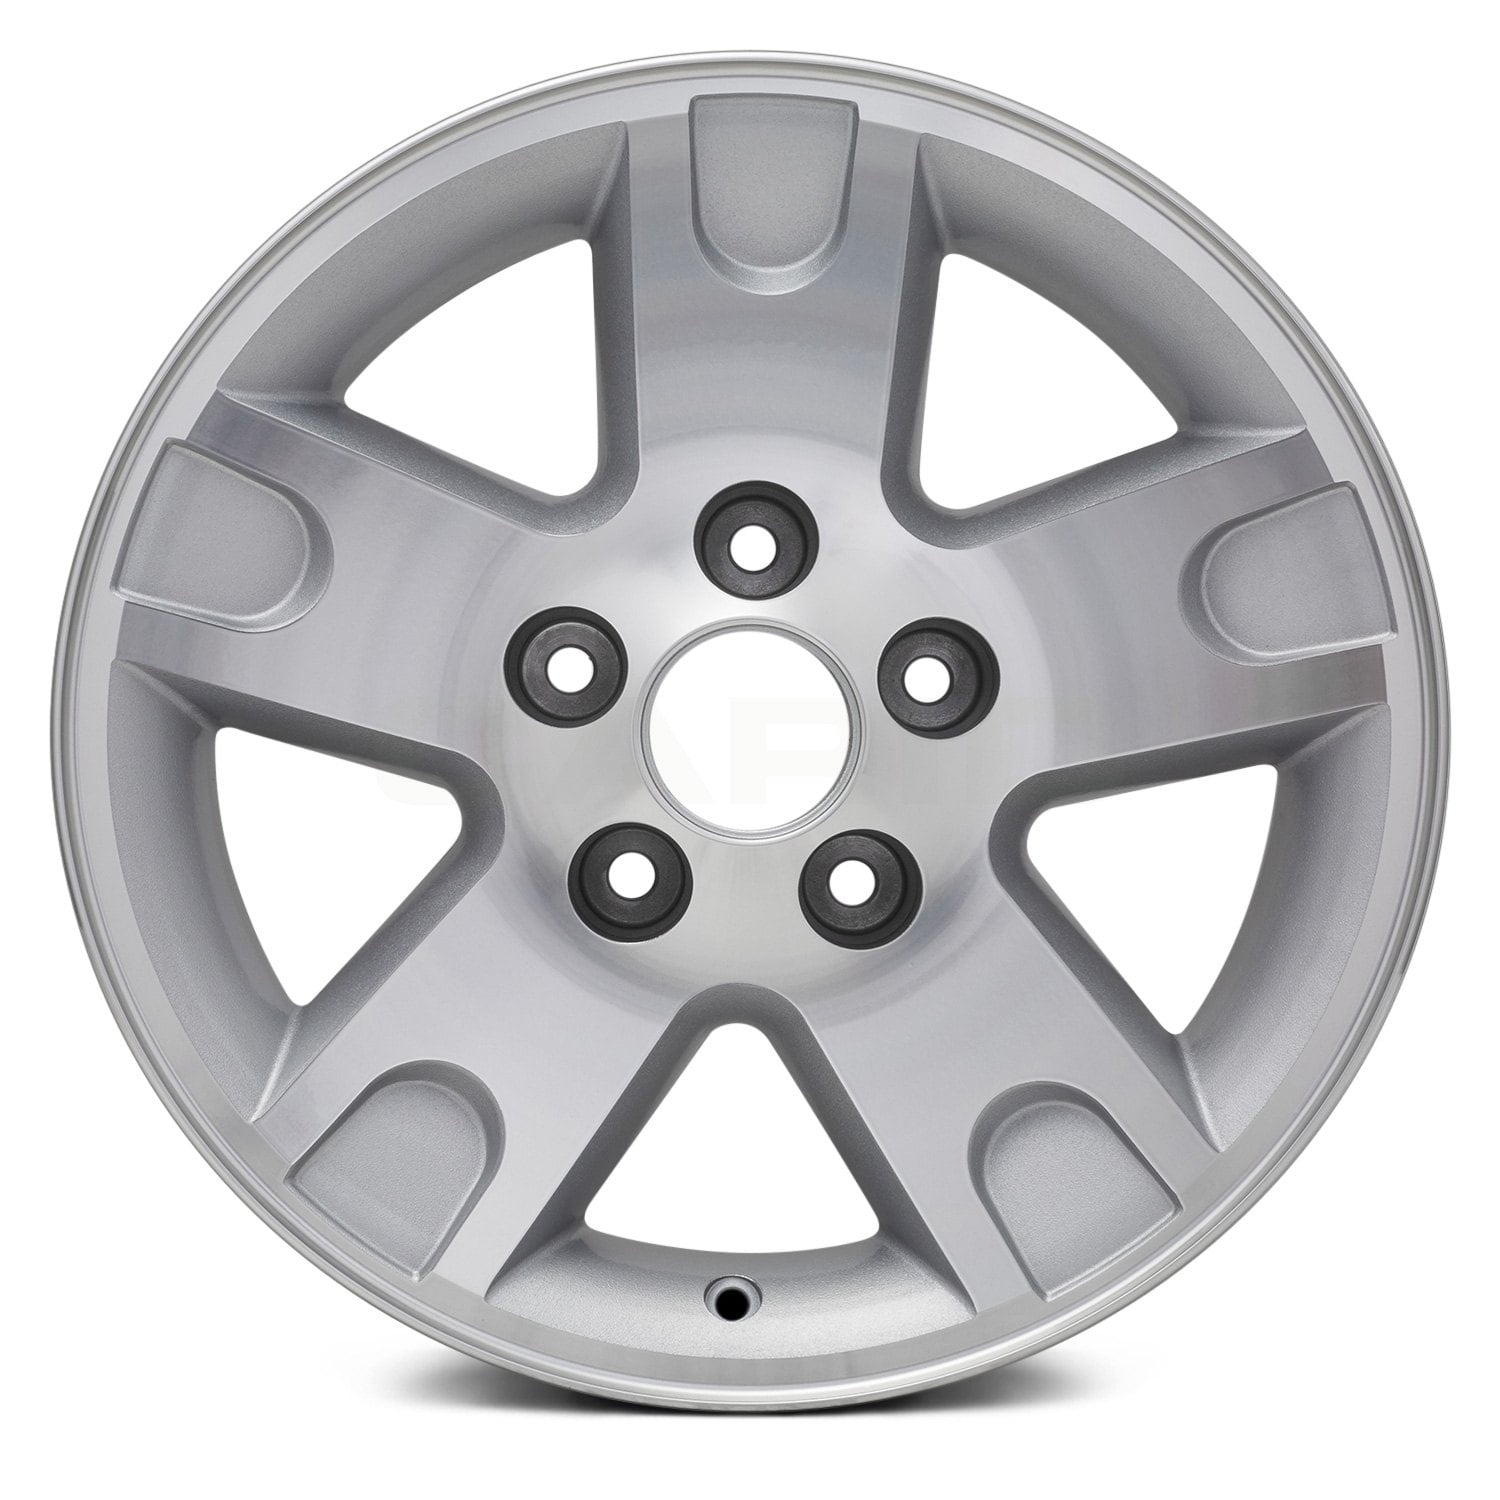 20 Inch Black Rims For Ford F150